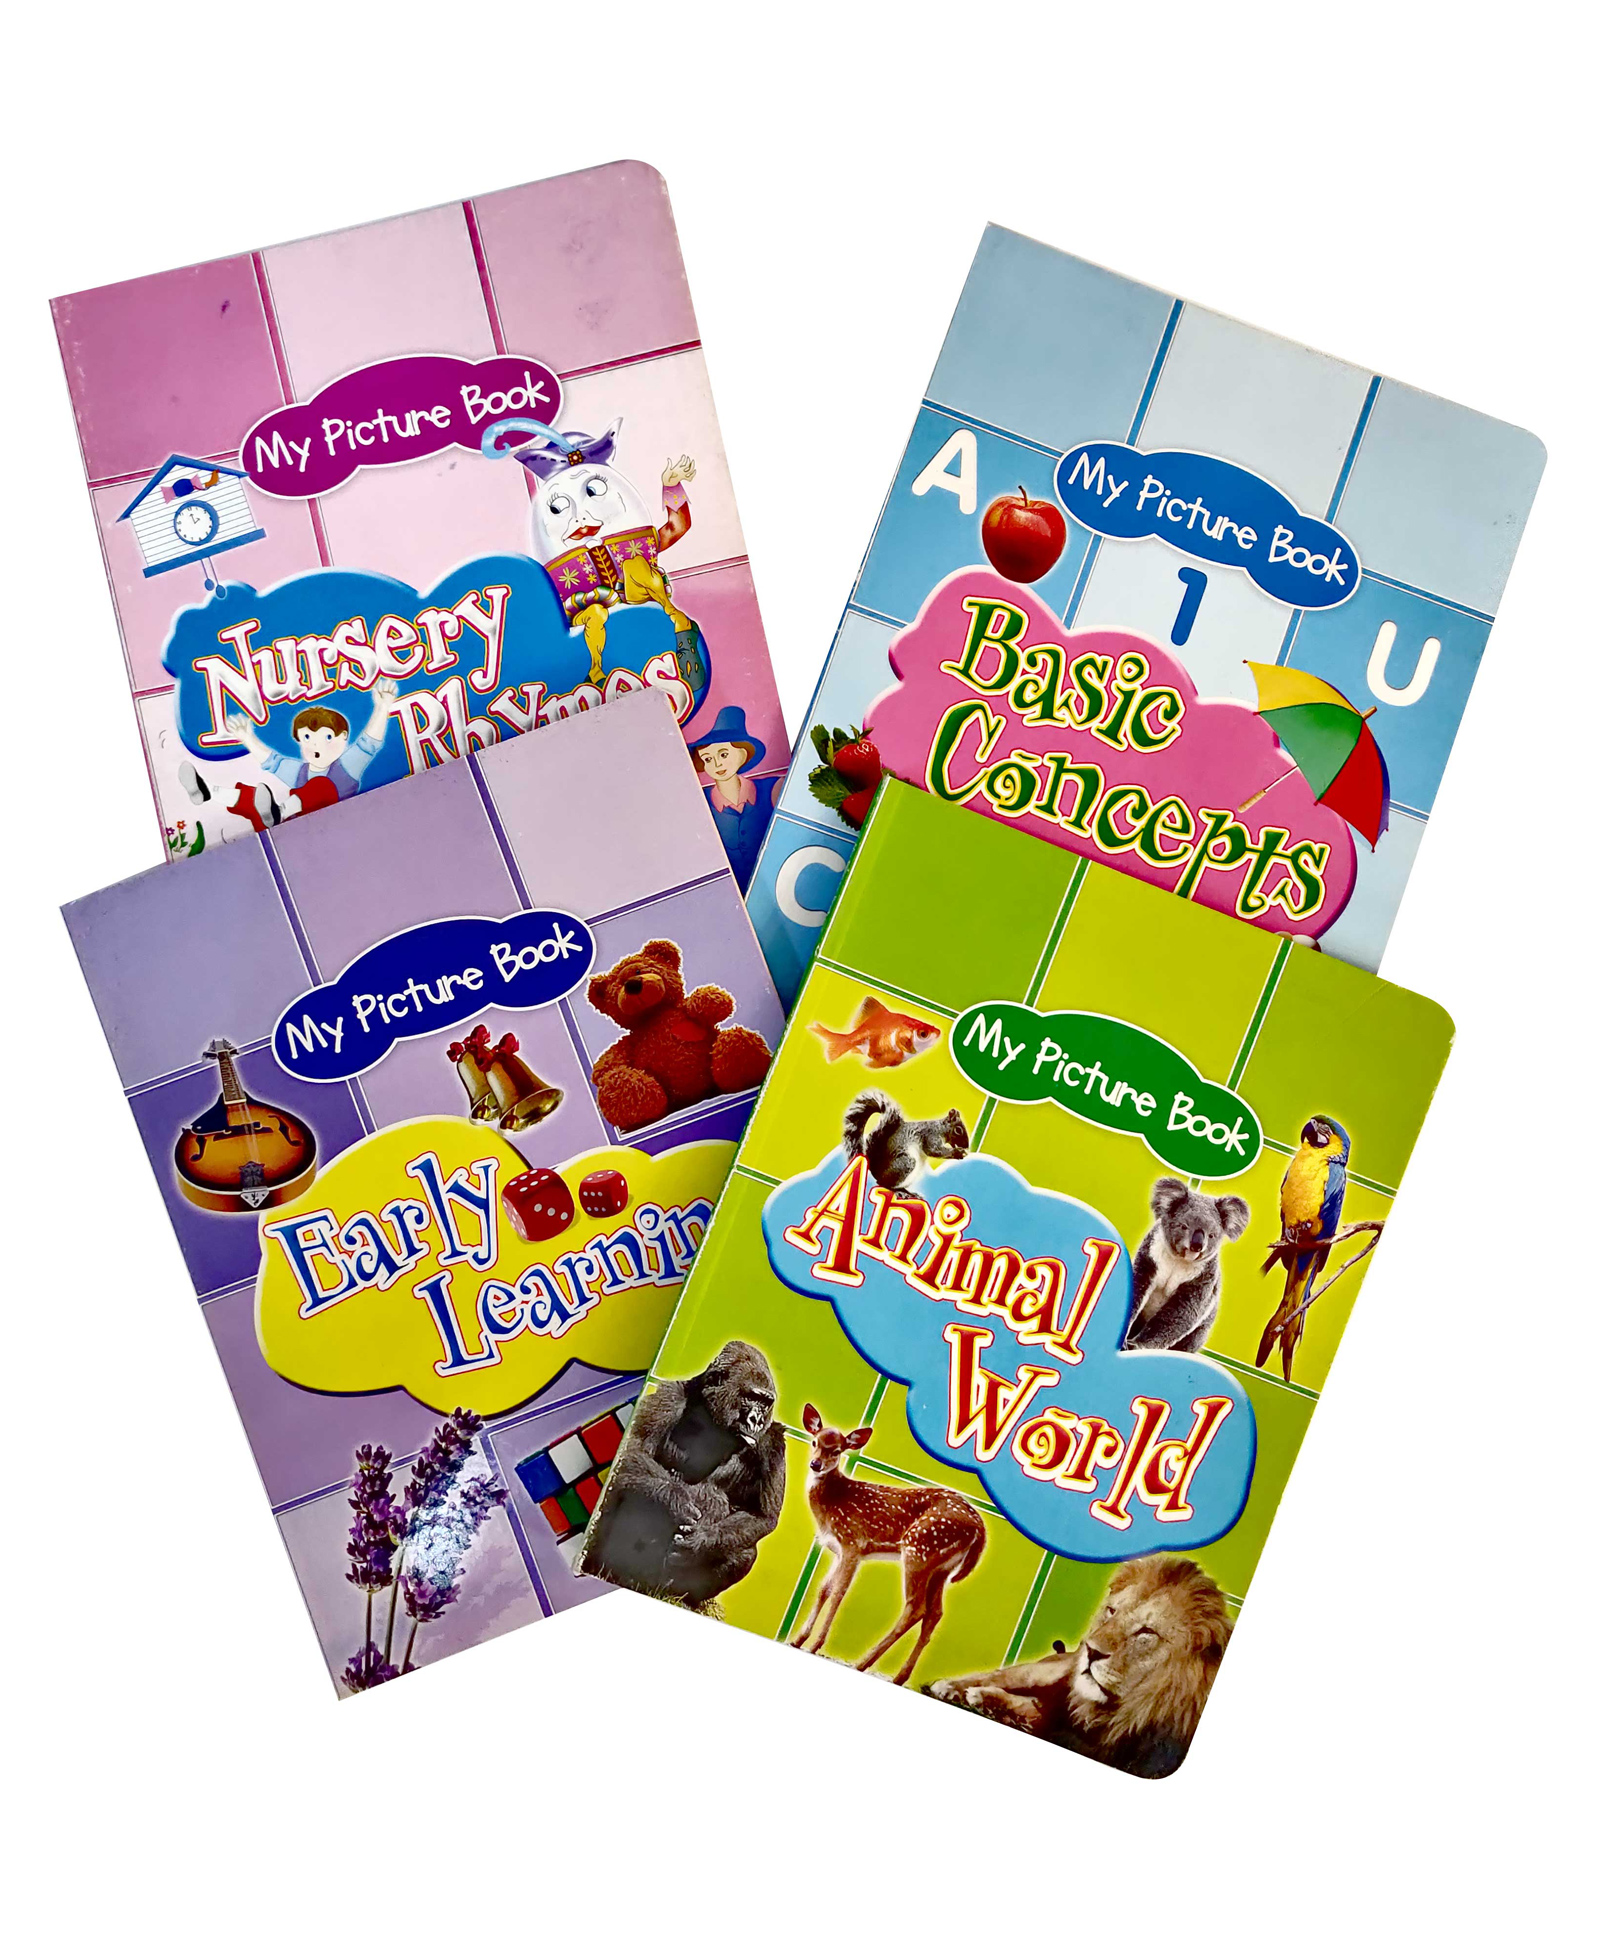 Sterling My Picture Book Basic Concepts, Nursery Rhymes, Animal World &  Early Learning Set of 4 - English Online in India, Buy at Best Price from   - 12689866